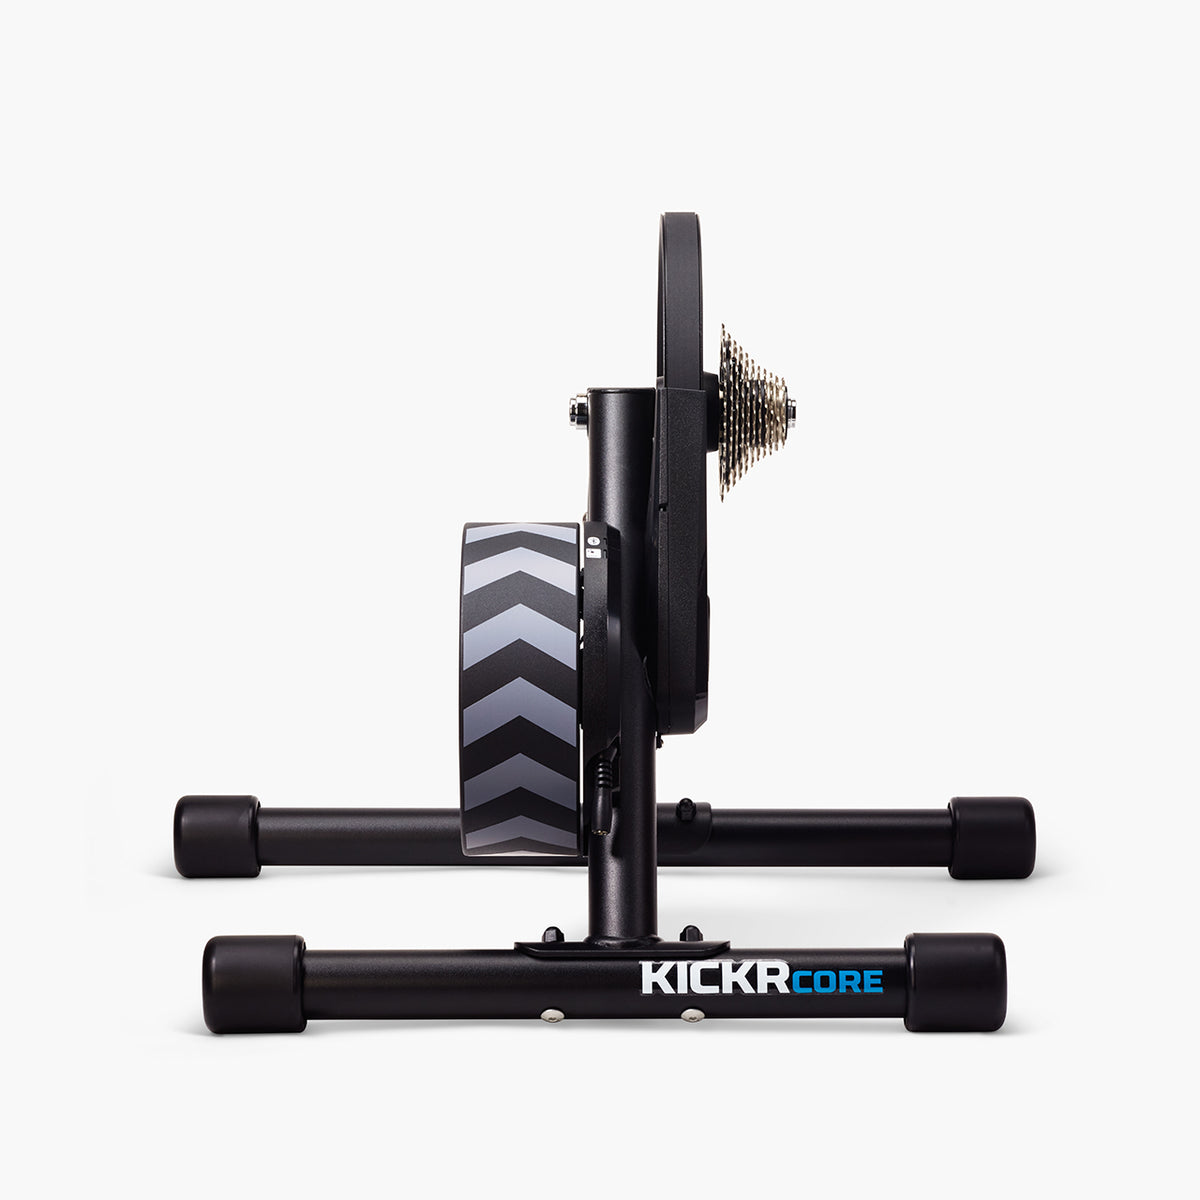 Wahoo KICKR CORE Zwift compatible with 11-speed cassette